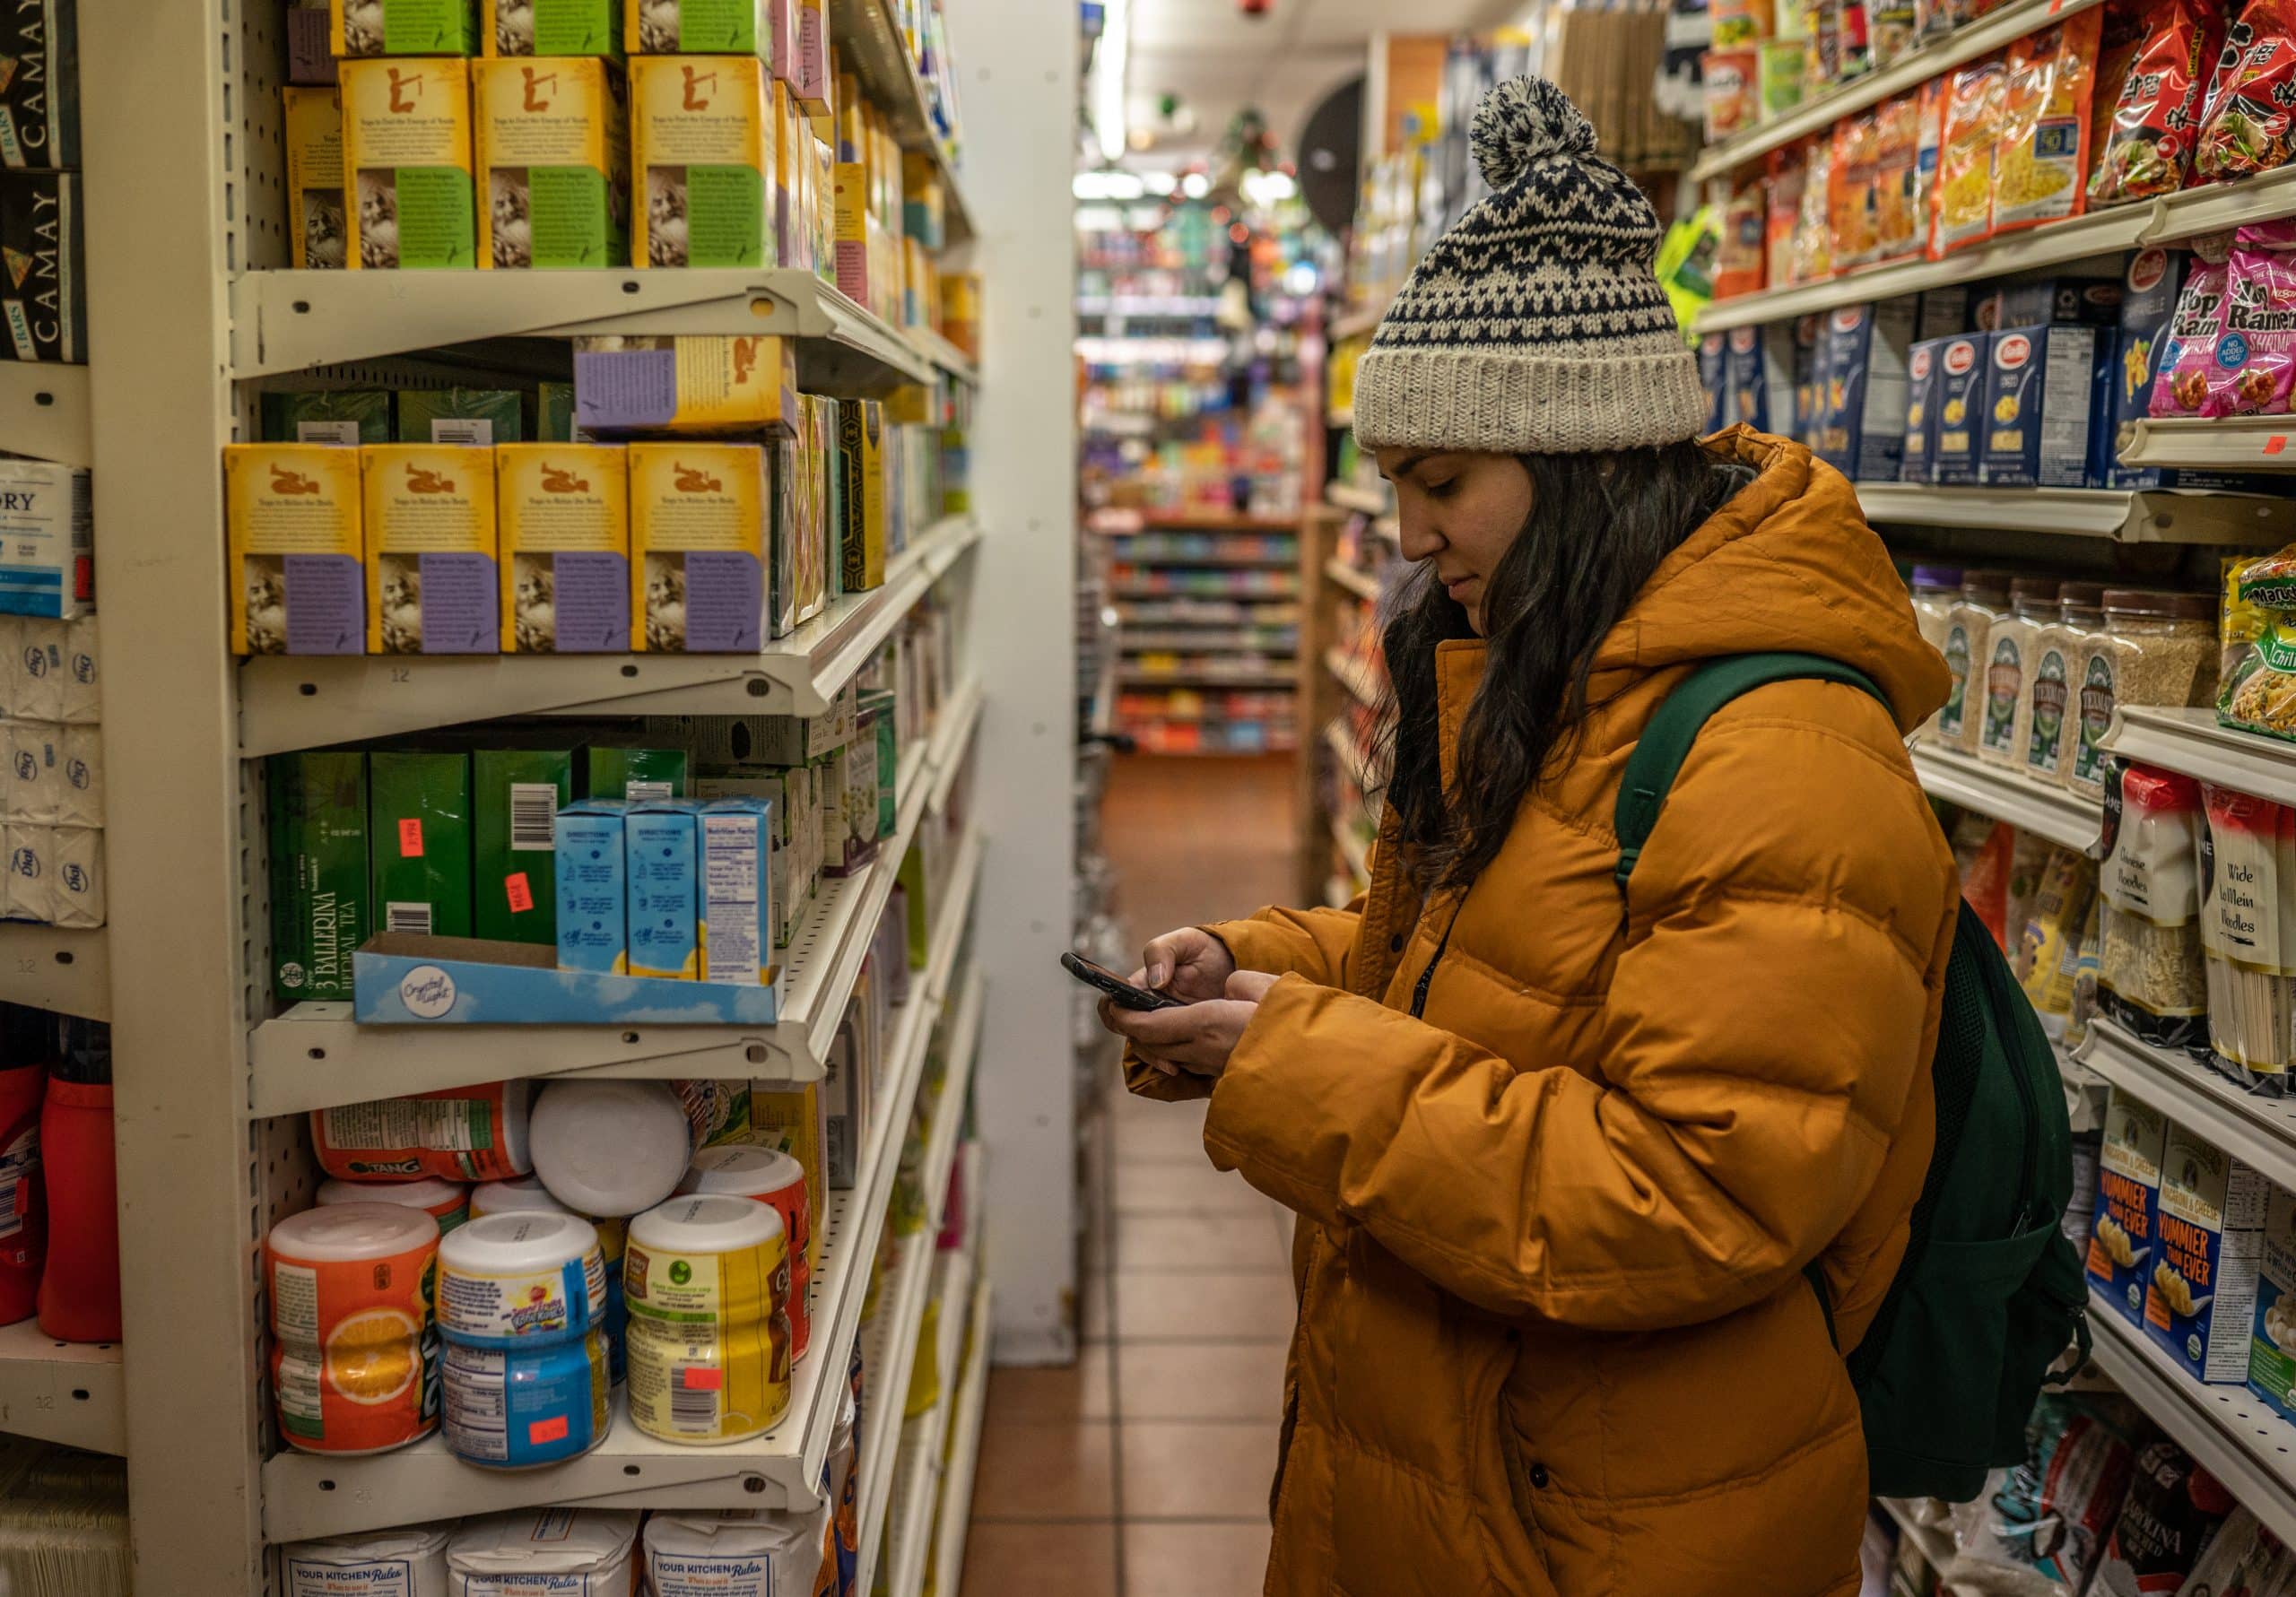 Woman in a coat looking at her phone in a grocery store